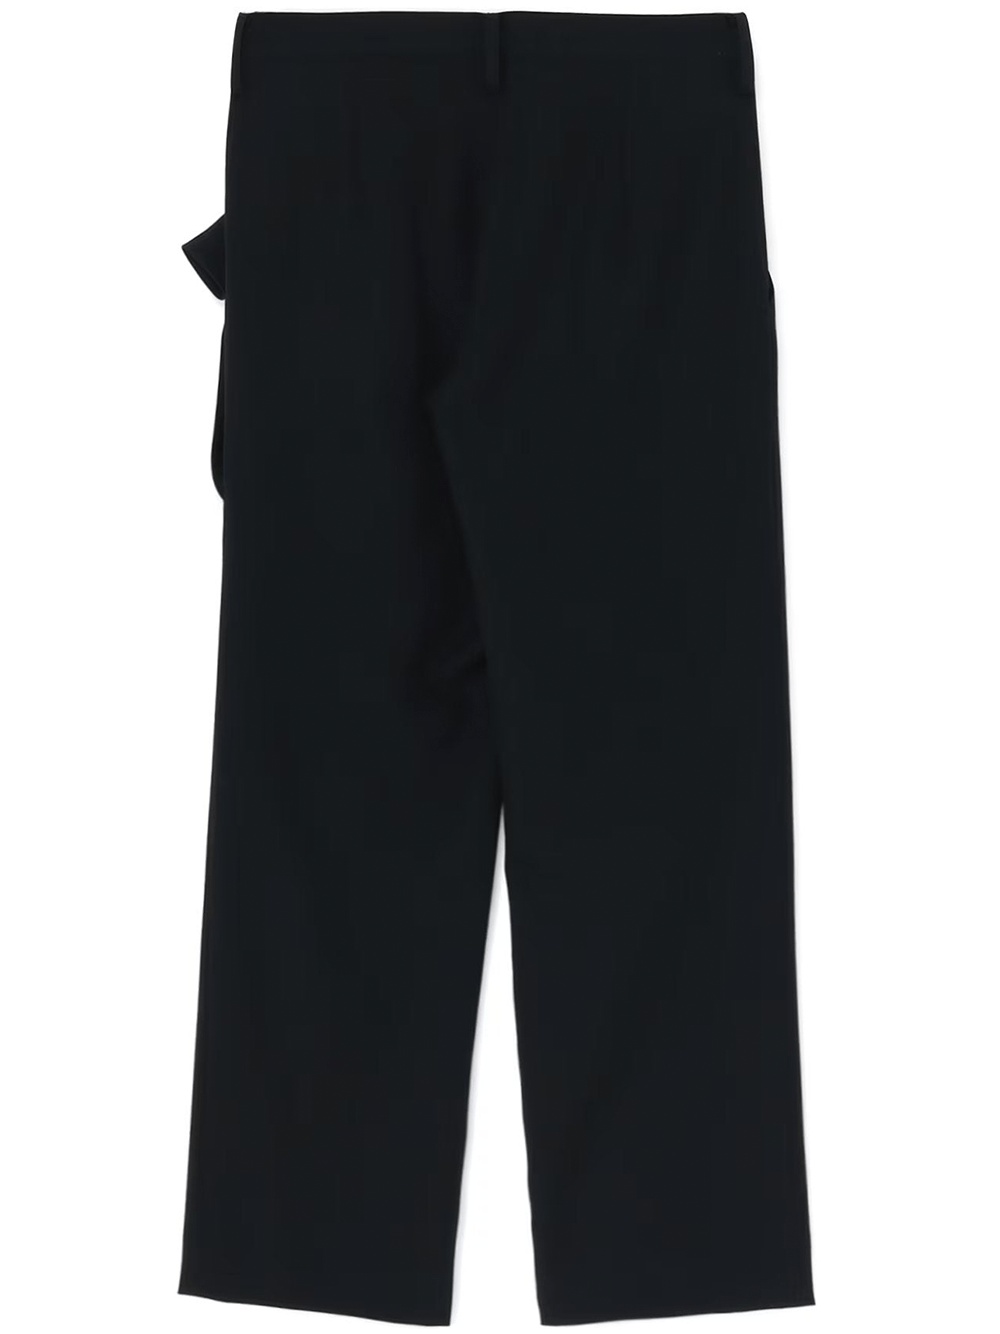 Left-Front Tucked Pants - 6